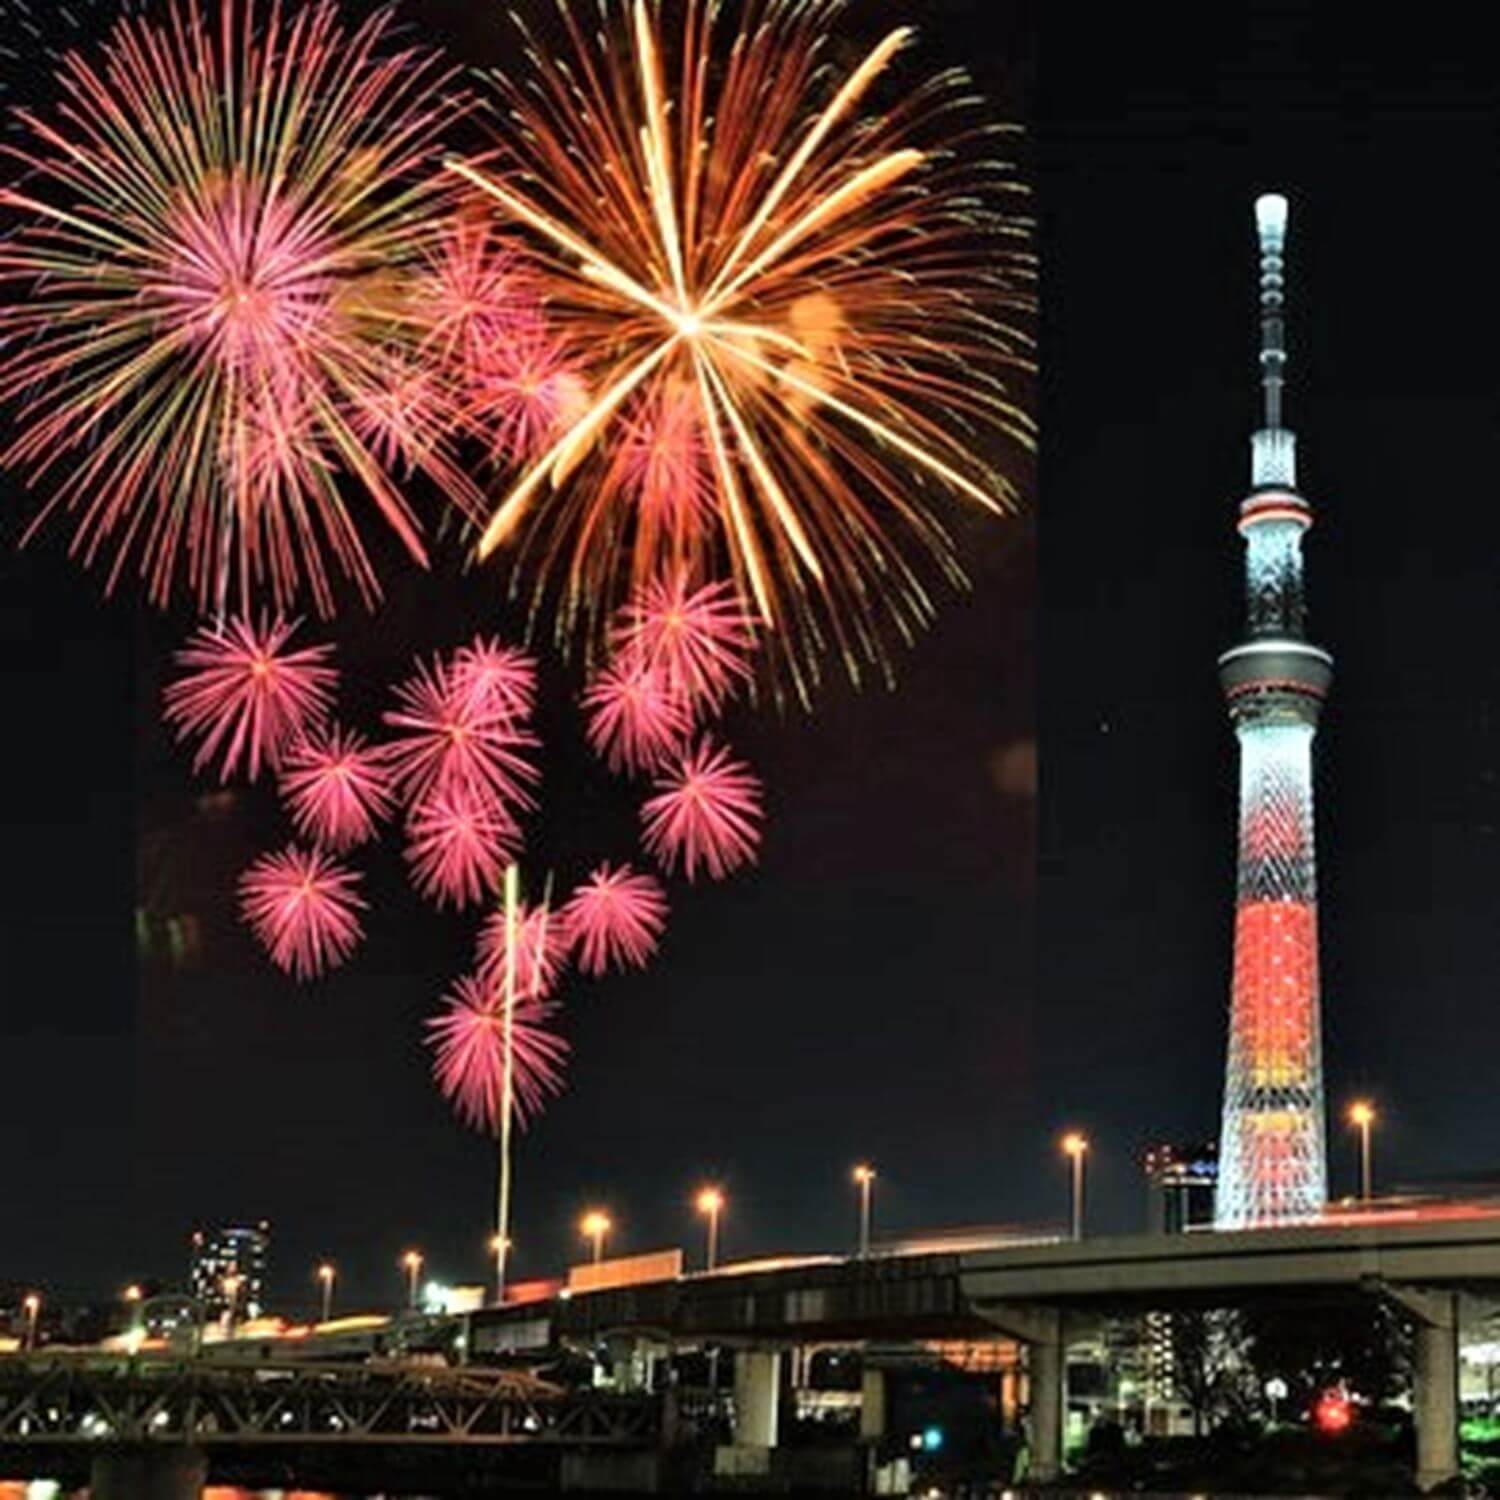 Every year around Asakusa in Tokyo, a fireworks display is held on the bank of the Sumida River =Pixta